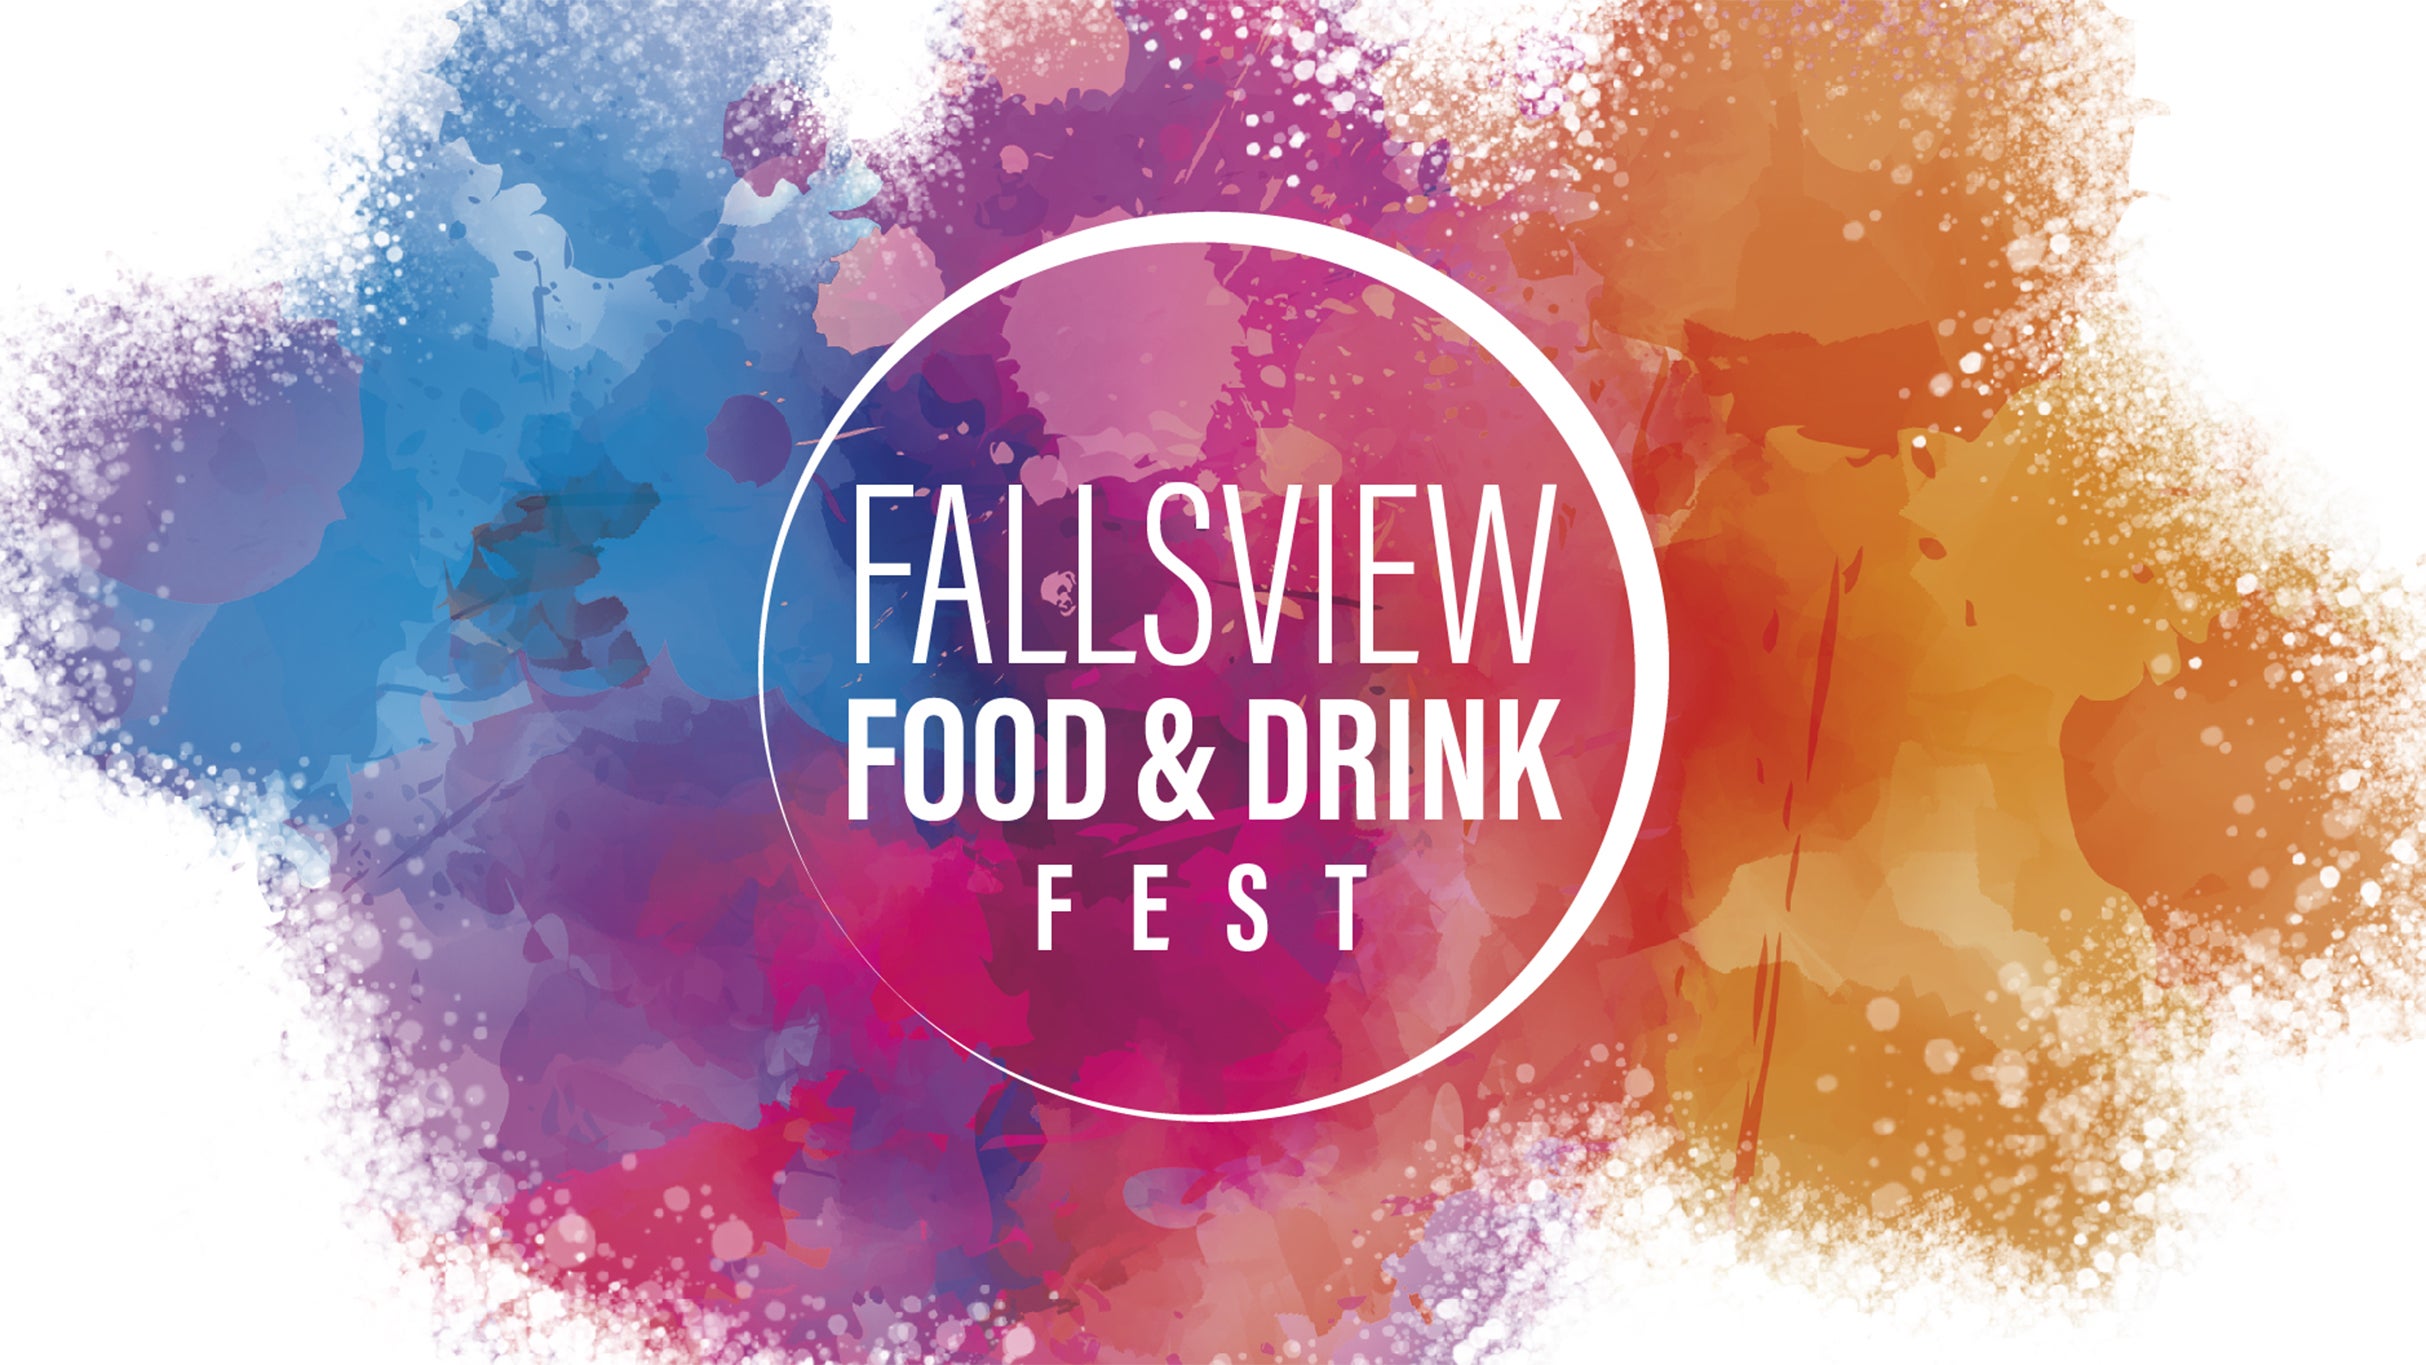 Fallsview Food & Drink Fest - Fallsview Food Con in Niagara Falls promo photo for Community presale offer code